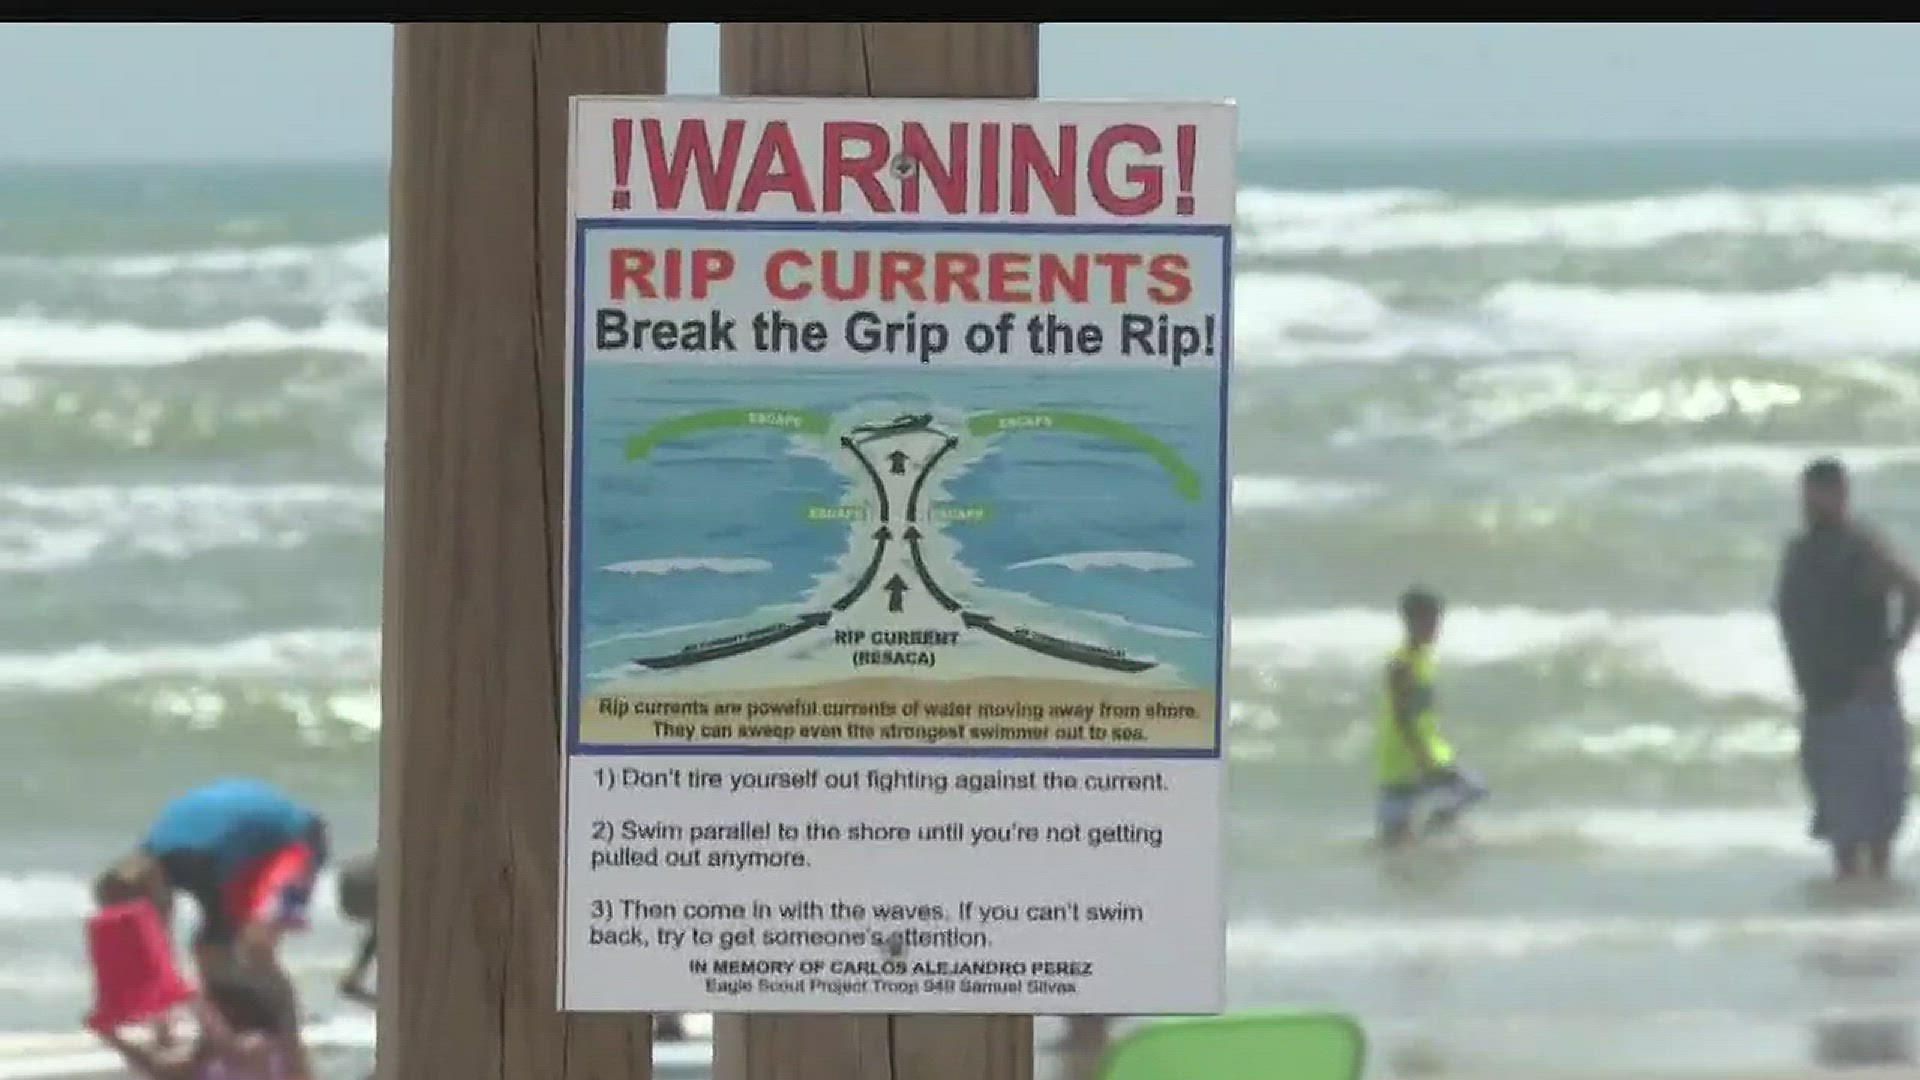 A local Boy Scout is trying to prevent drownings caused by strong rip currents as part of his Eagle Scout project.